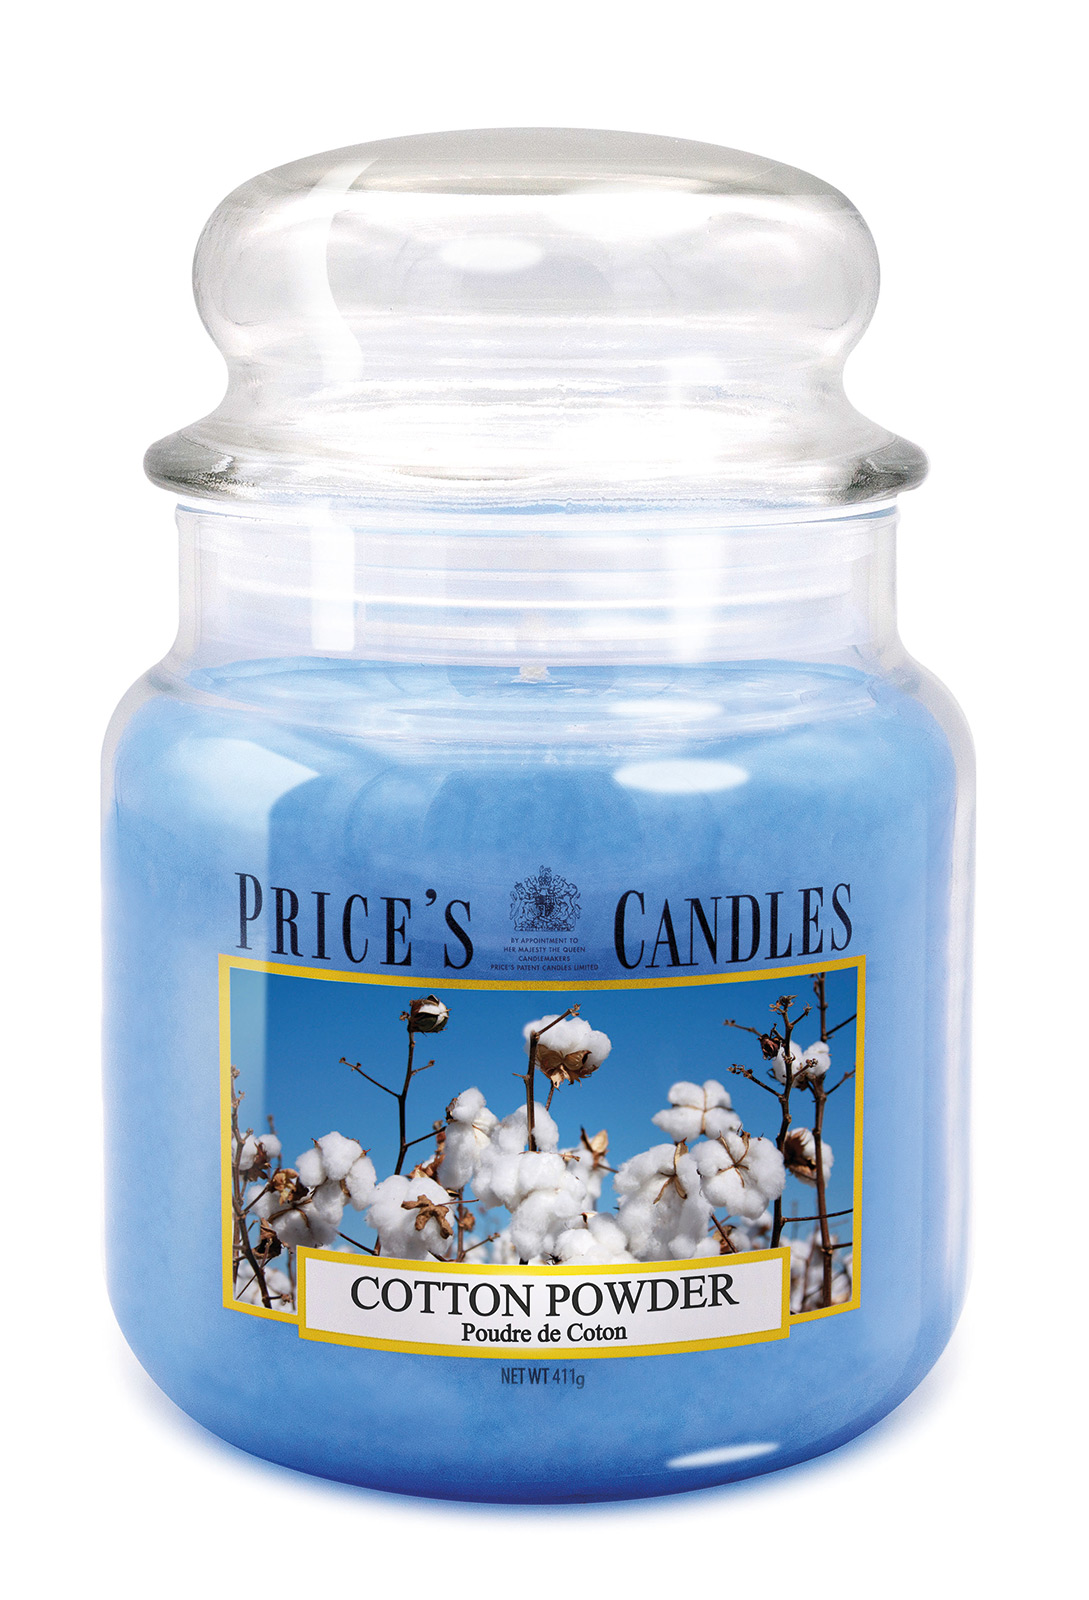 Prices Candle "Cotton Powder" 411g 